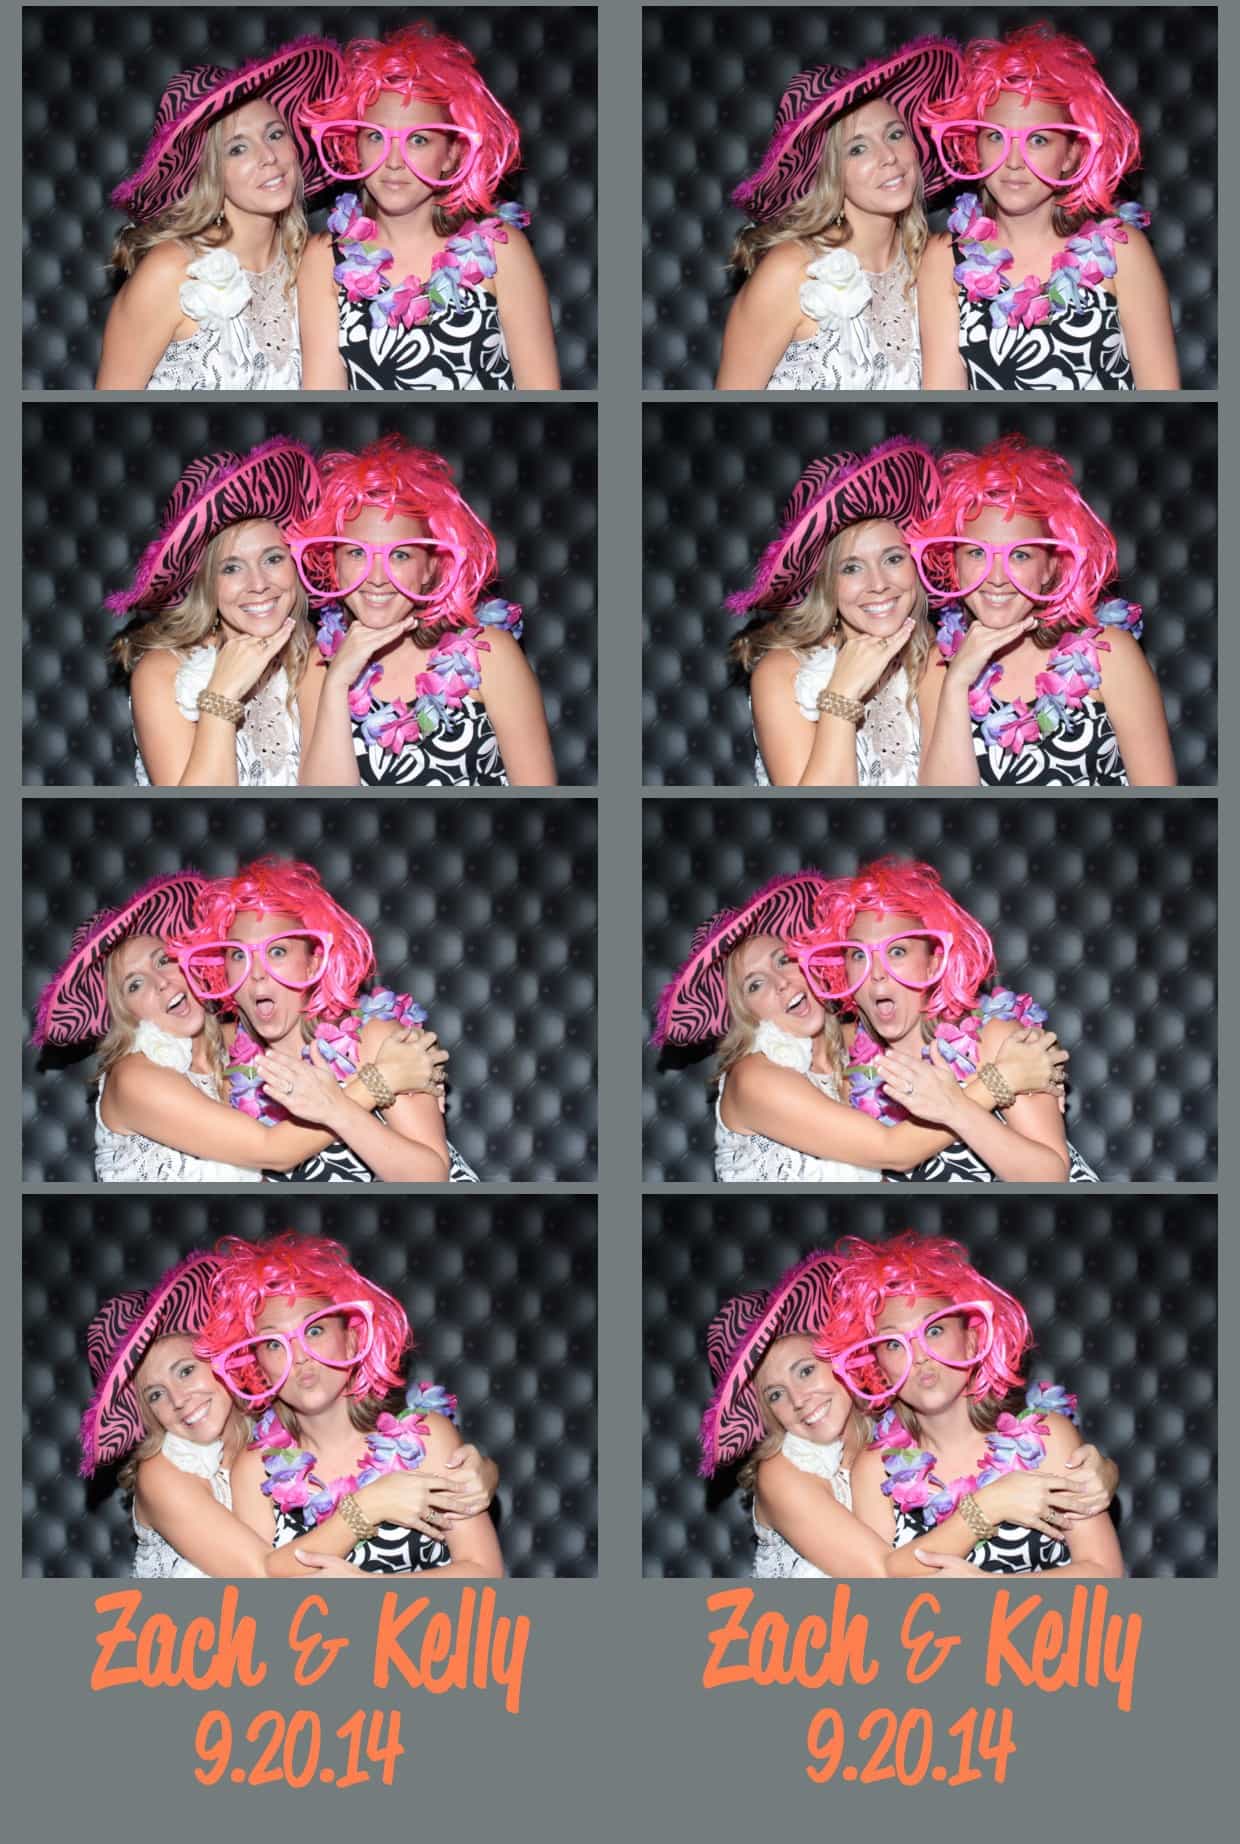 Photo-Booth-Rental-Wedding-Reception-Kyle-Winfield-Inn-Affordable-No.1-Remarkable-Props-Fun-LGBT